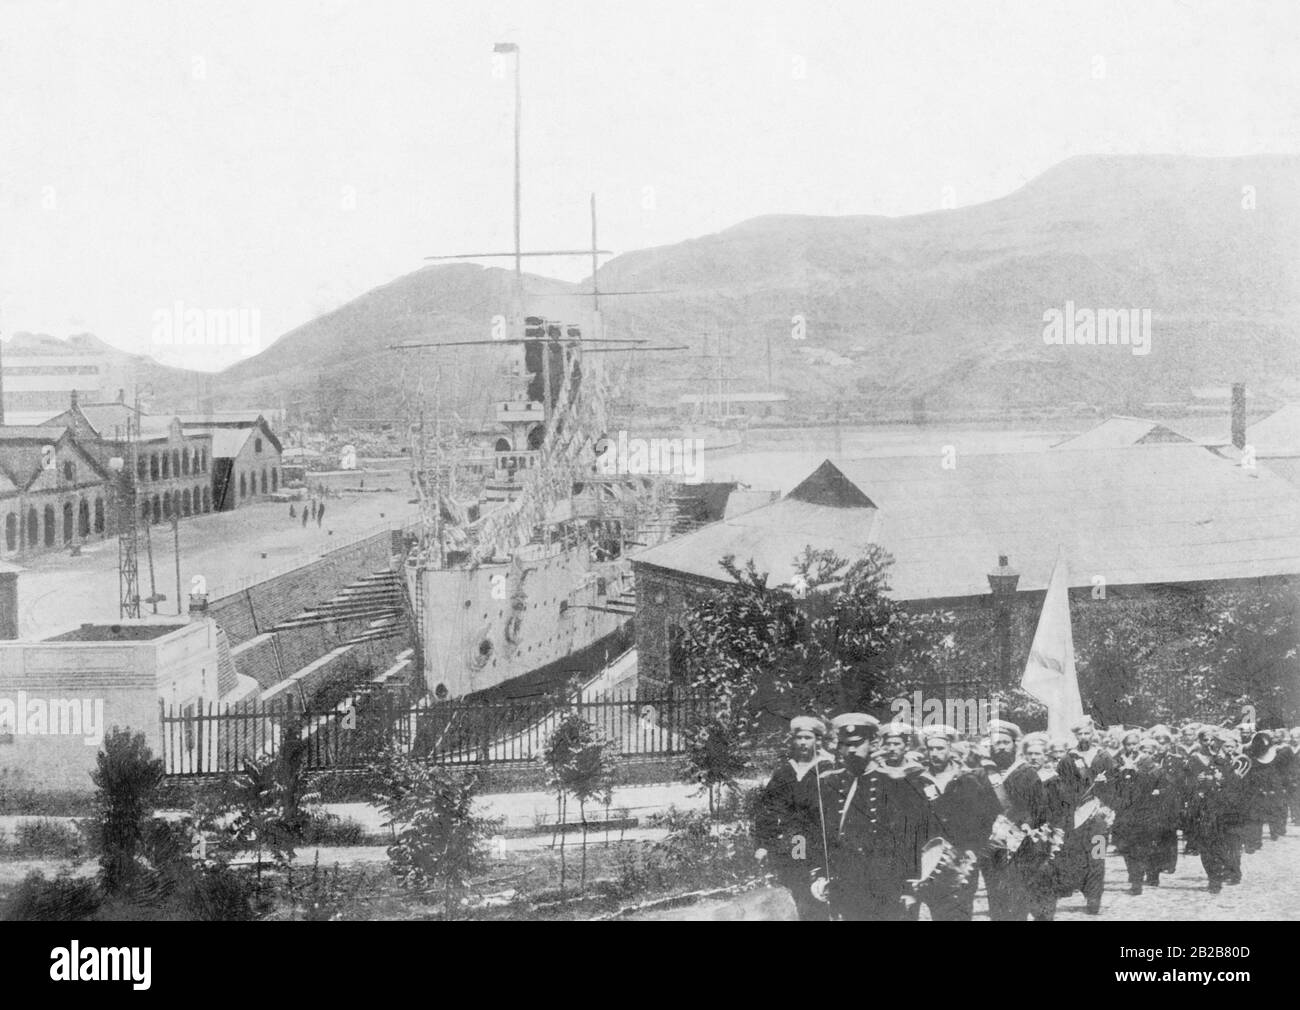 View to Port Arthur, today's Lüshunkou, a russian battleship in the dry dock and a marching band passing by. Stock Photo